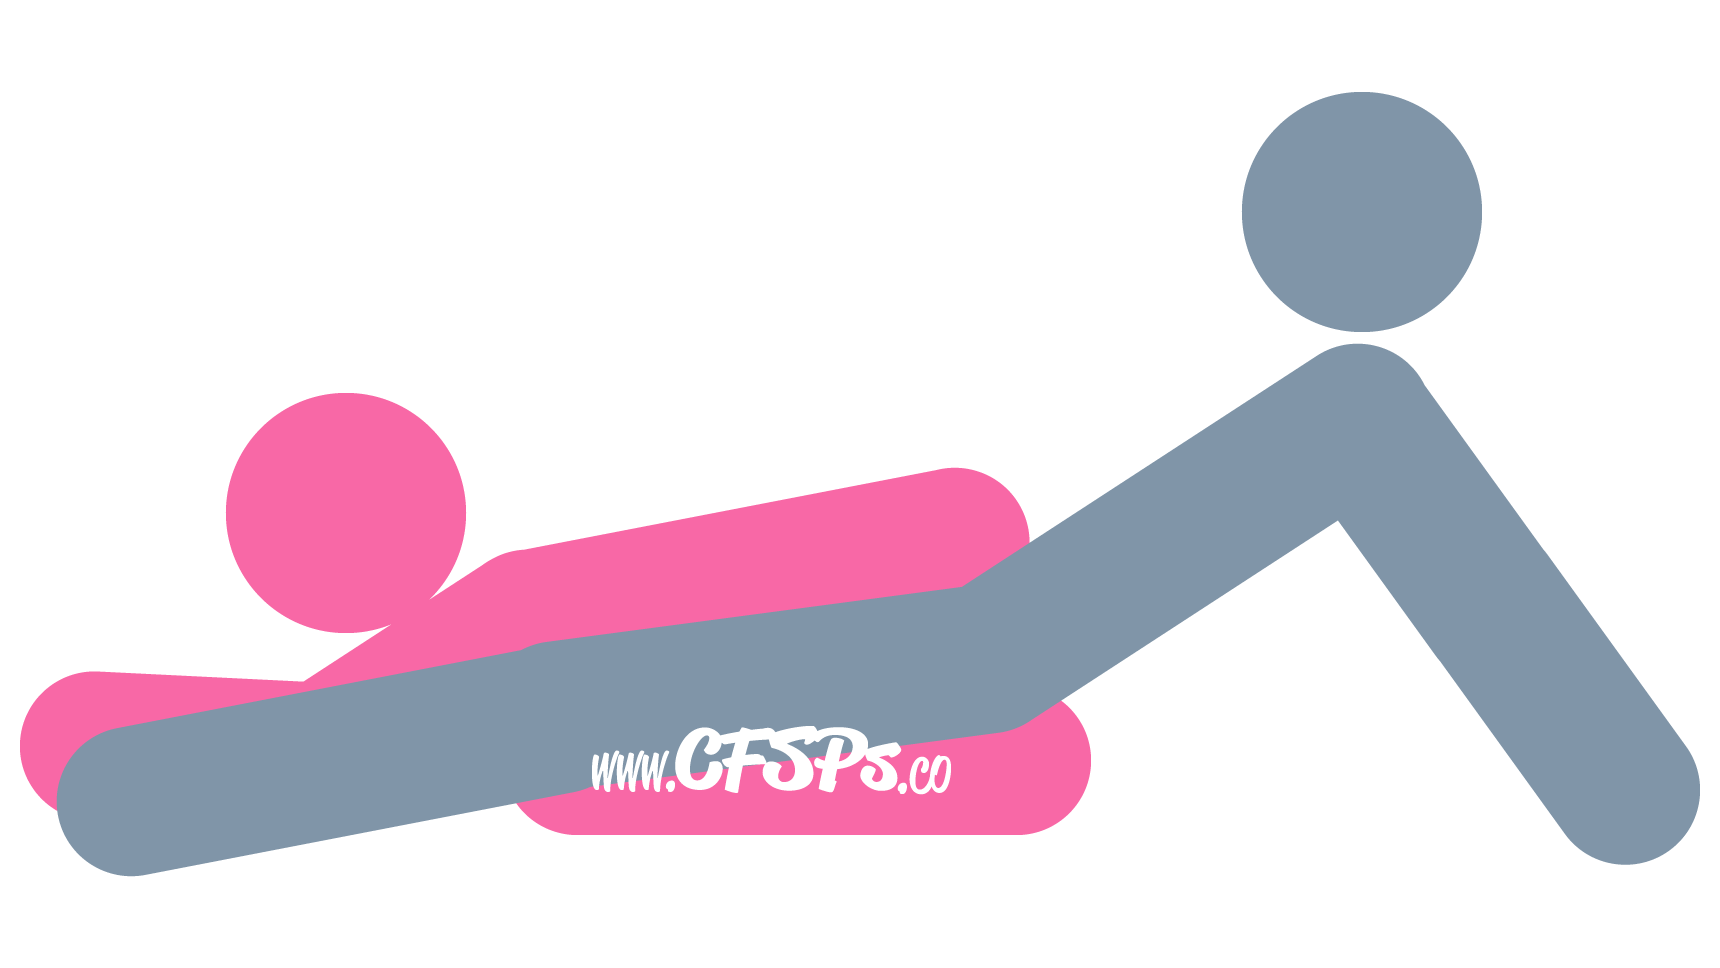 This stick figure image depicts a man and woman having sex in the Clapper sex position. The woman is kneeling and leaning forward so that her head is almost on the bed. The man is positioned with his legs open and his pelvis between the back of her feet and pelvis. He's leaning back and supporting his upper body with his arms on the bed behind him.